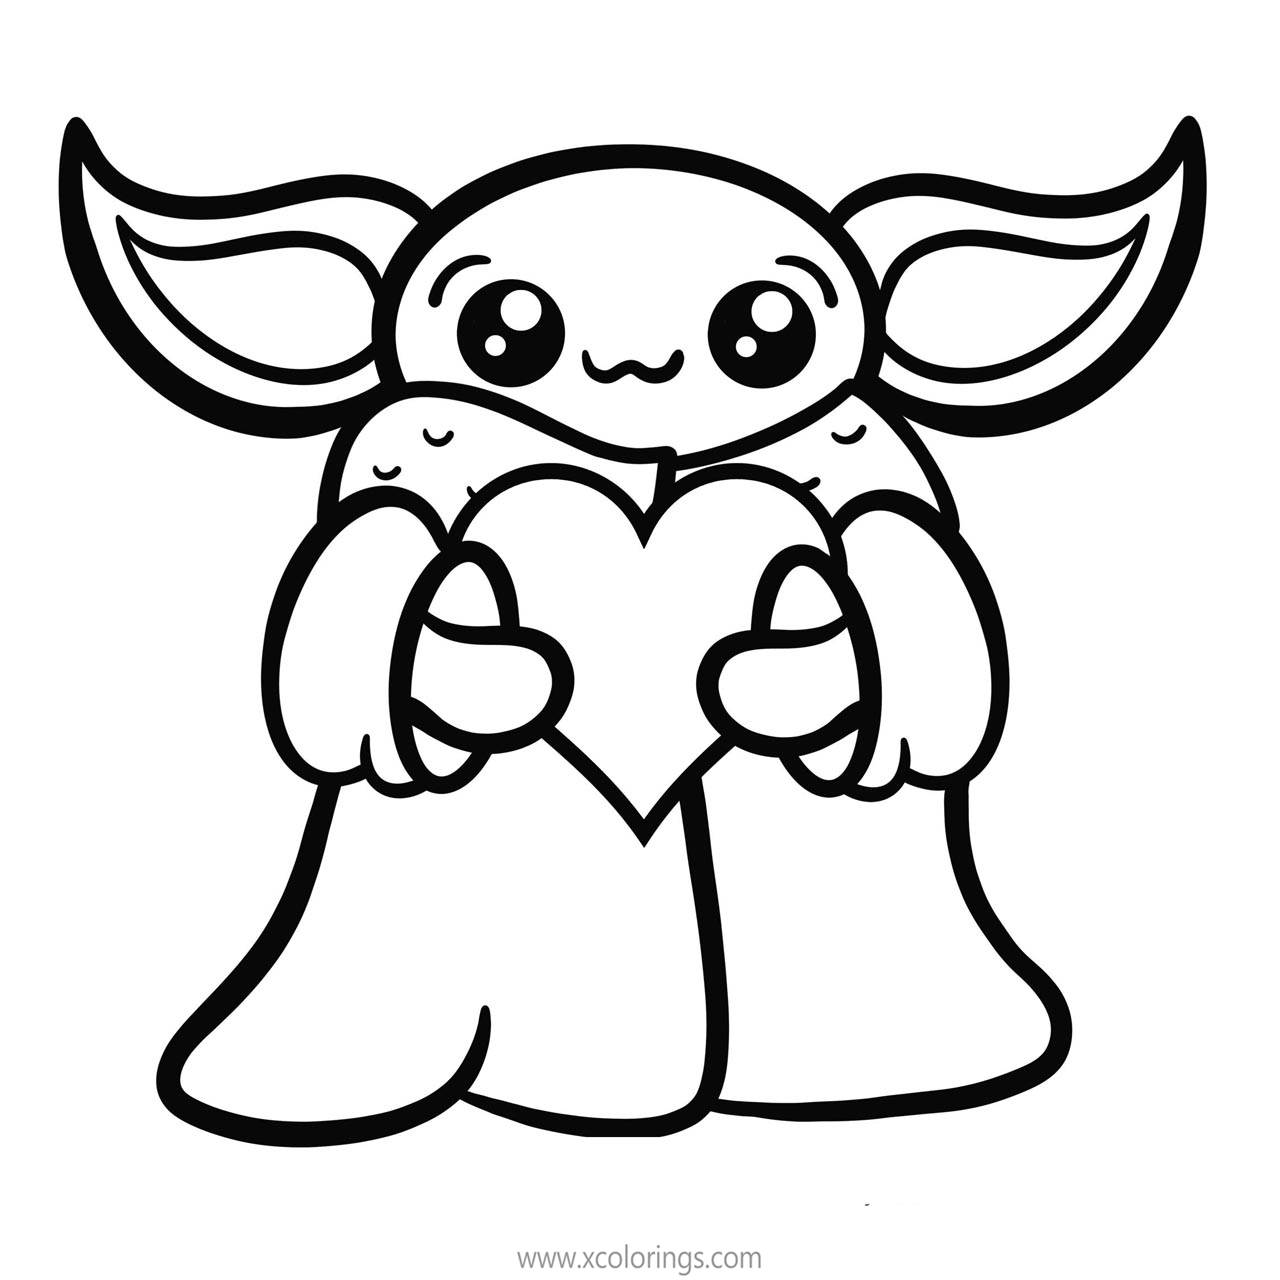 Cute Baby Yoda Coloring Pages by FishBiscuit5